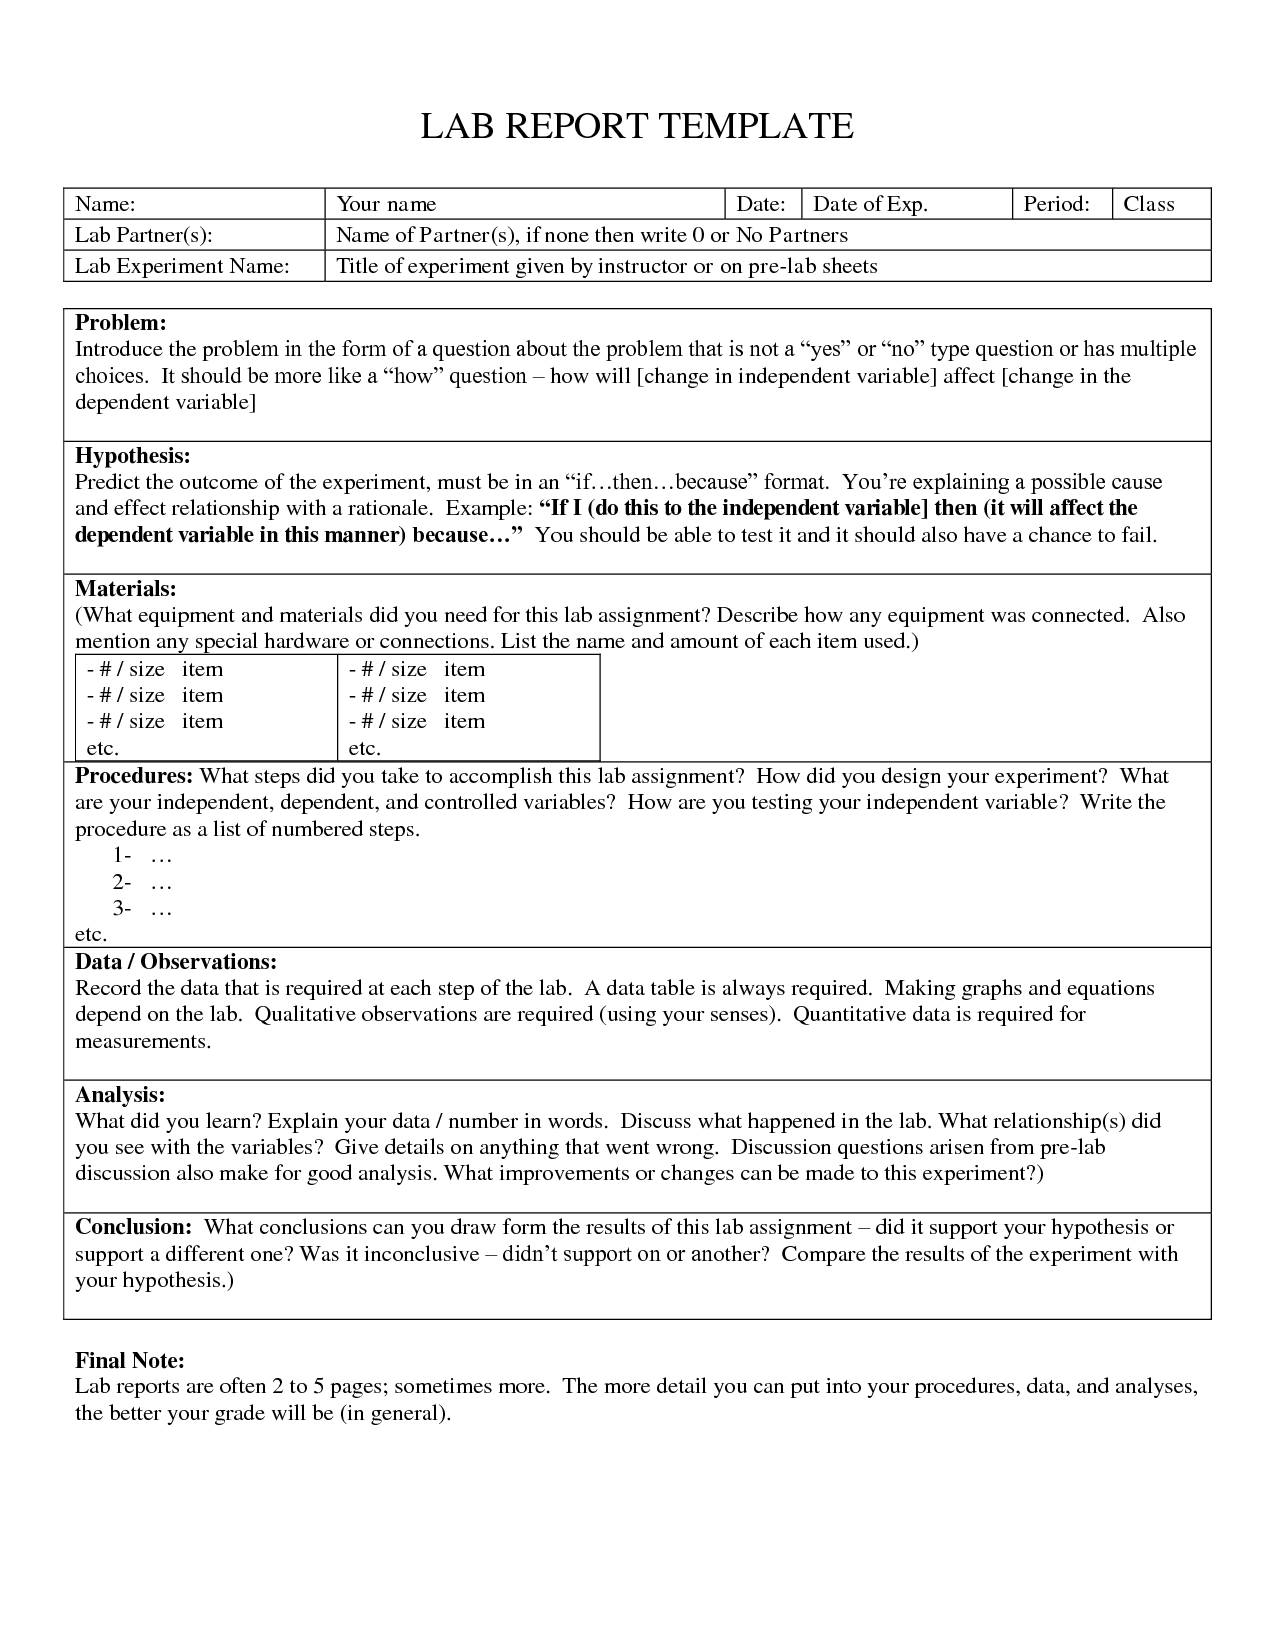 lab report template 1 237x300.png